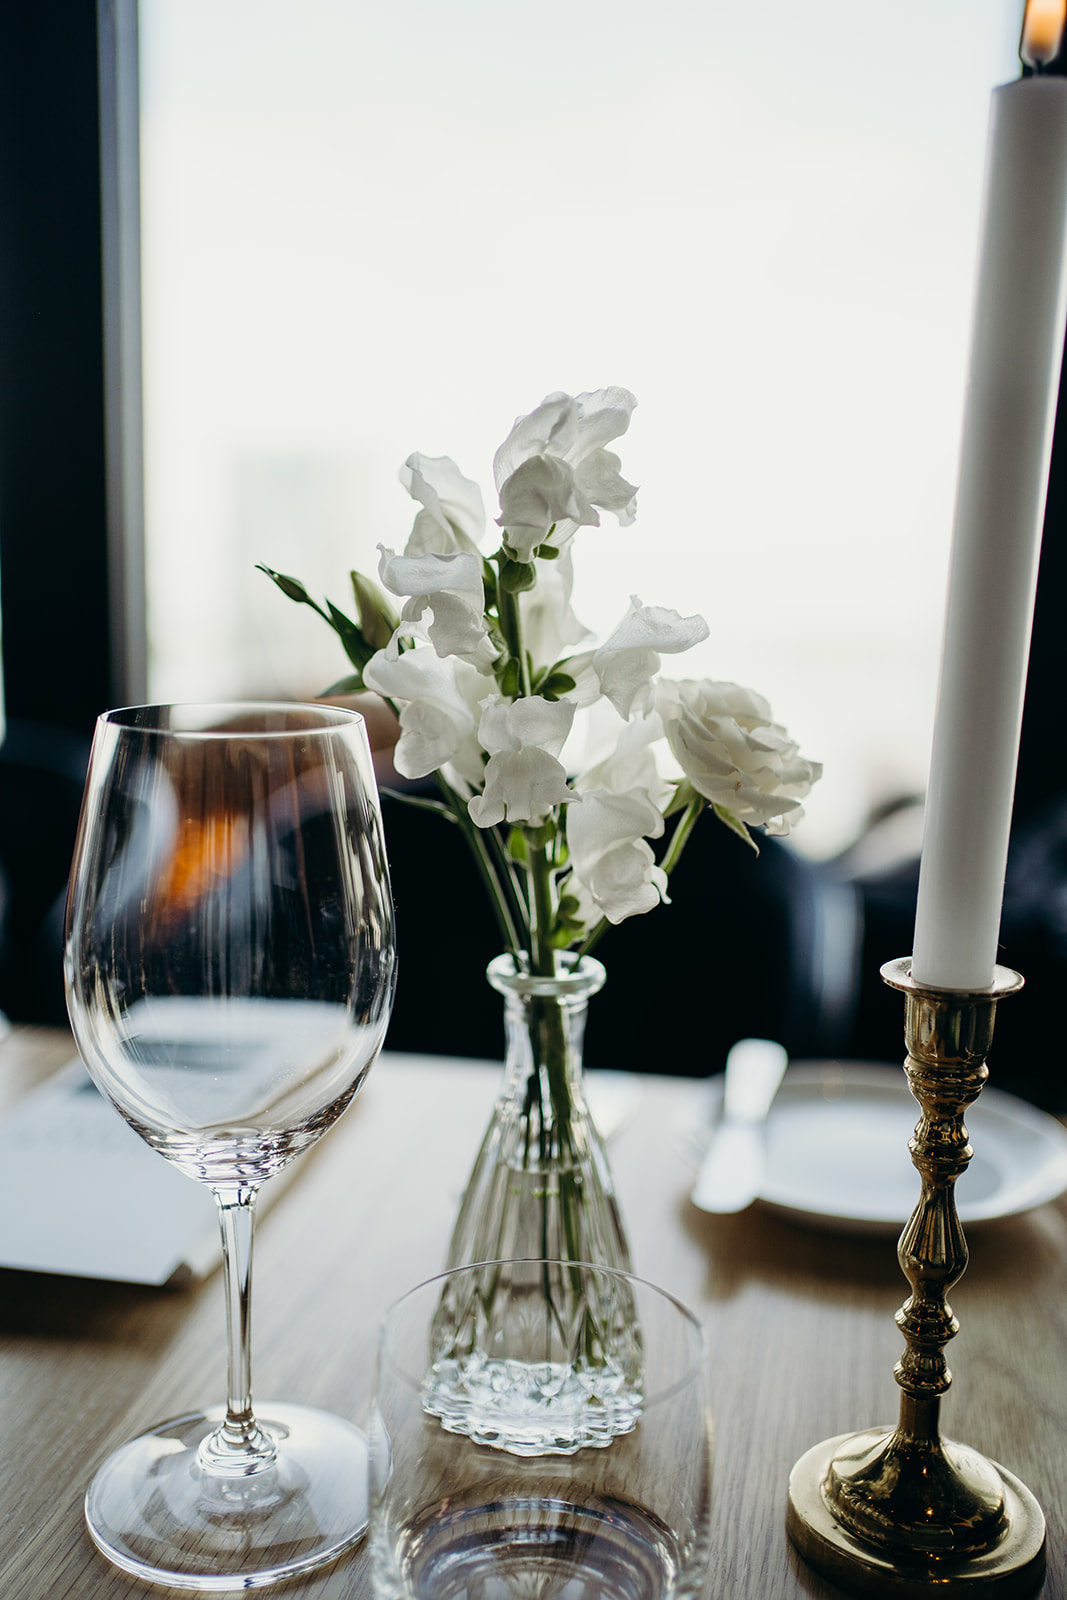 A candle, flowers and an empty wine glass on a table.